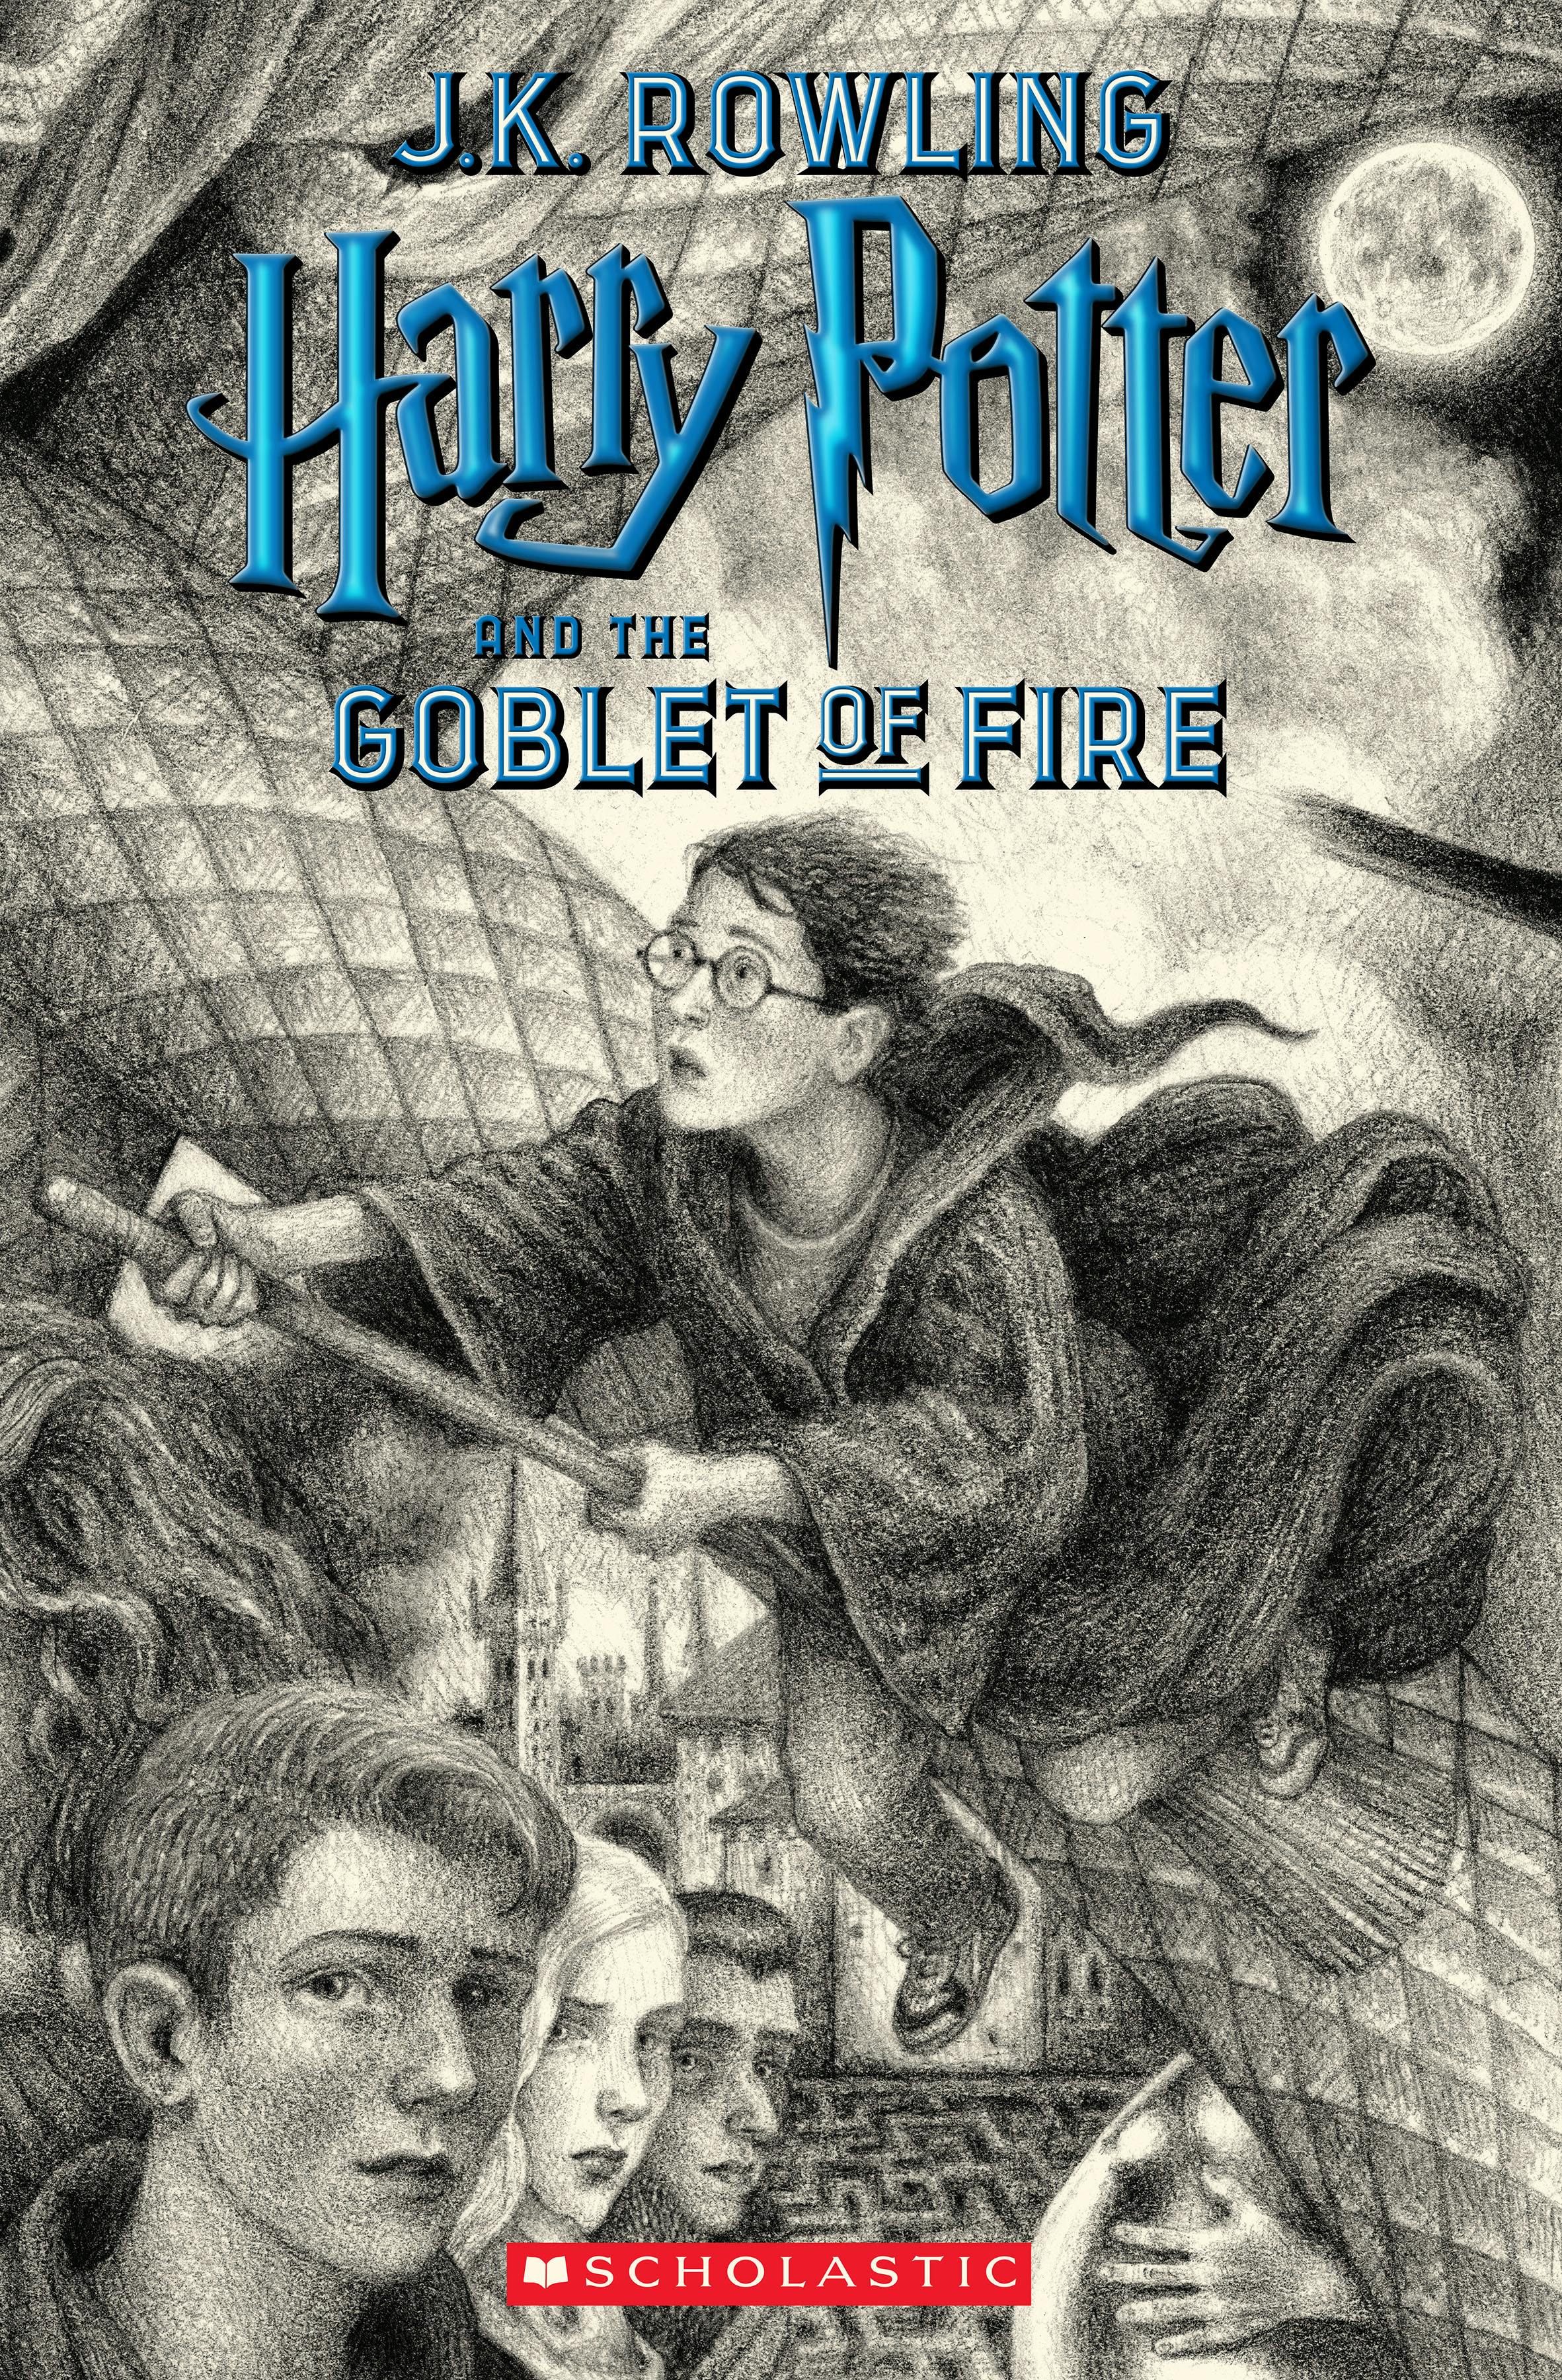 goblet of fire scholastic